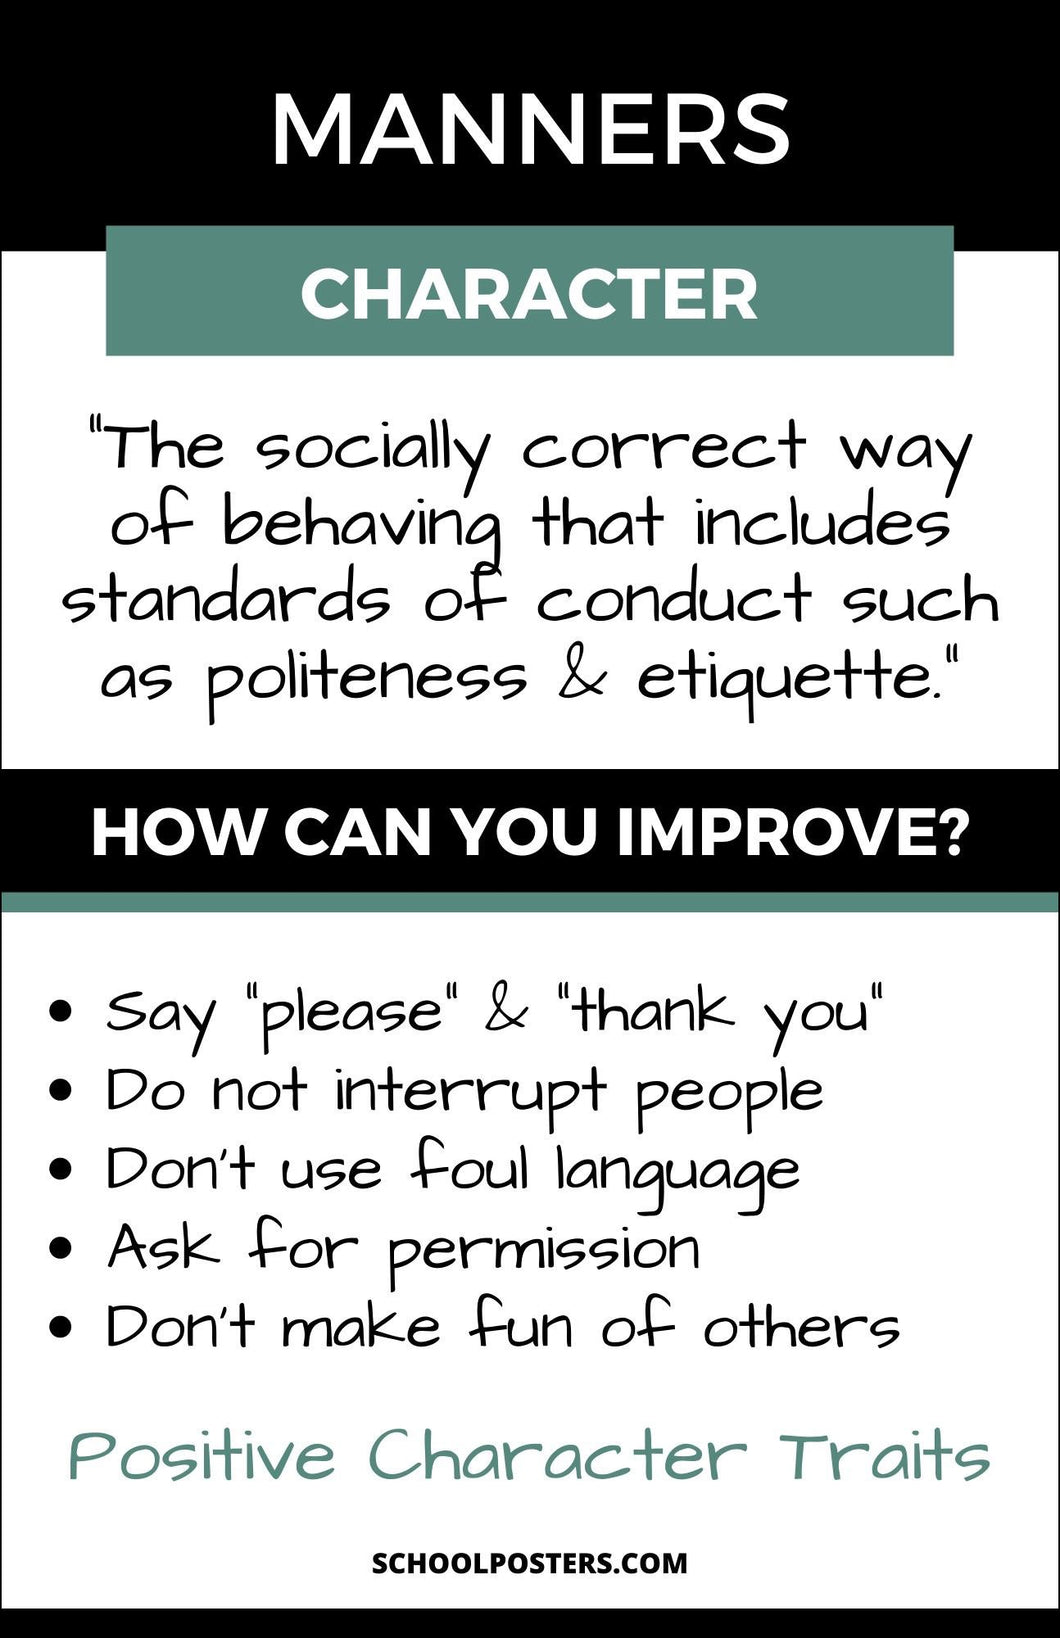 Manners Character Trait Poster